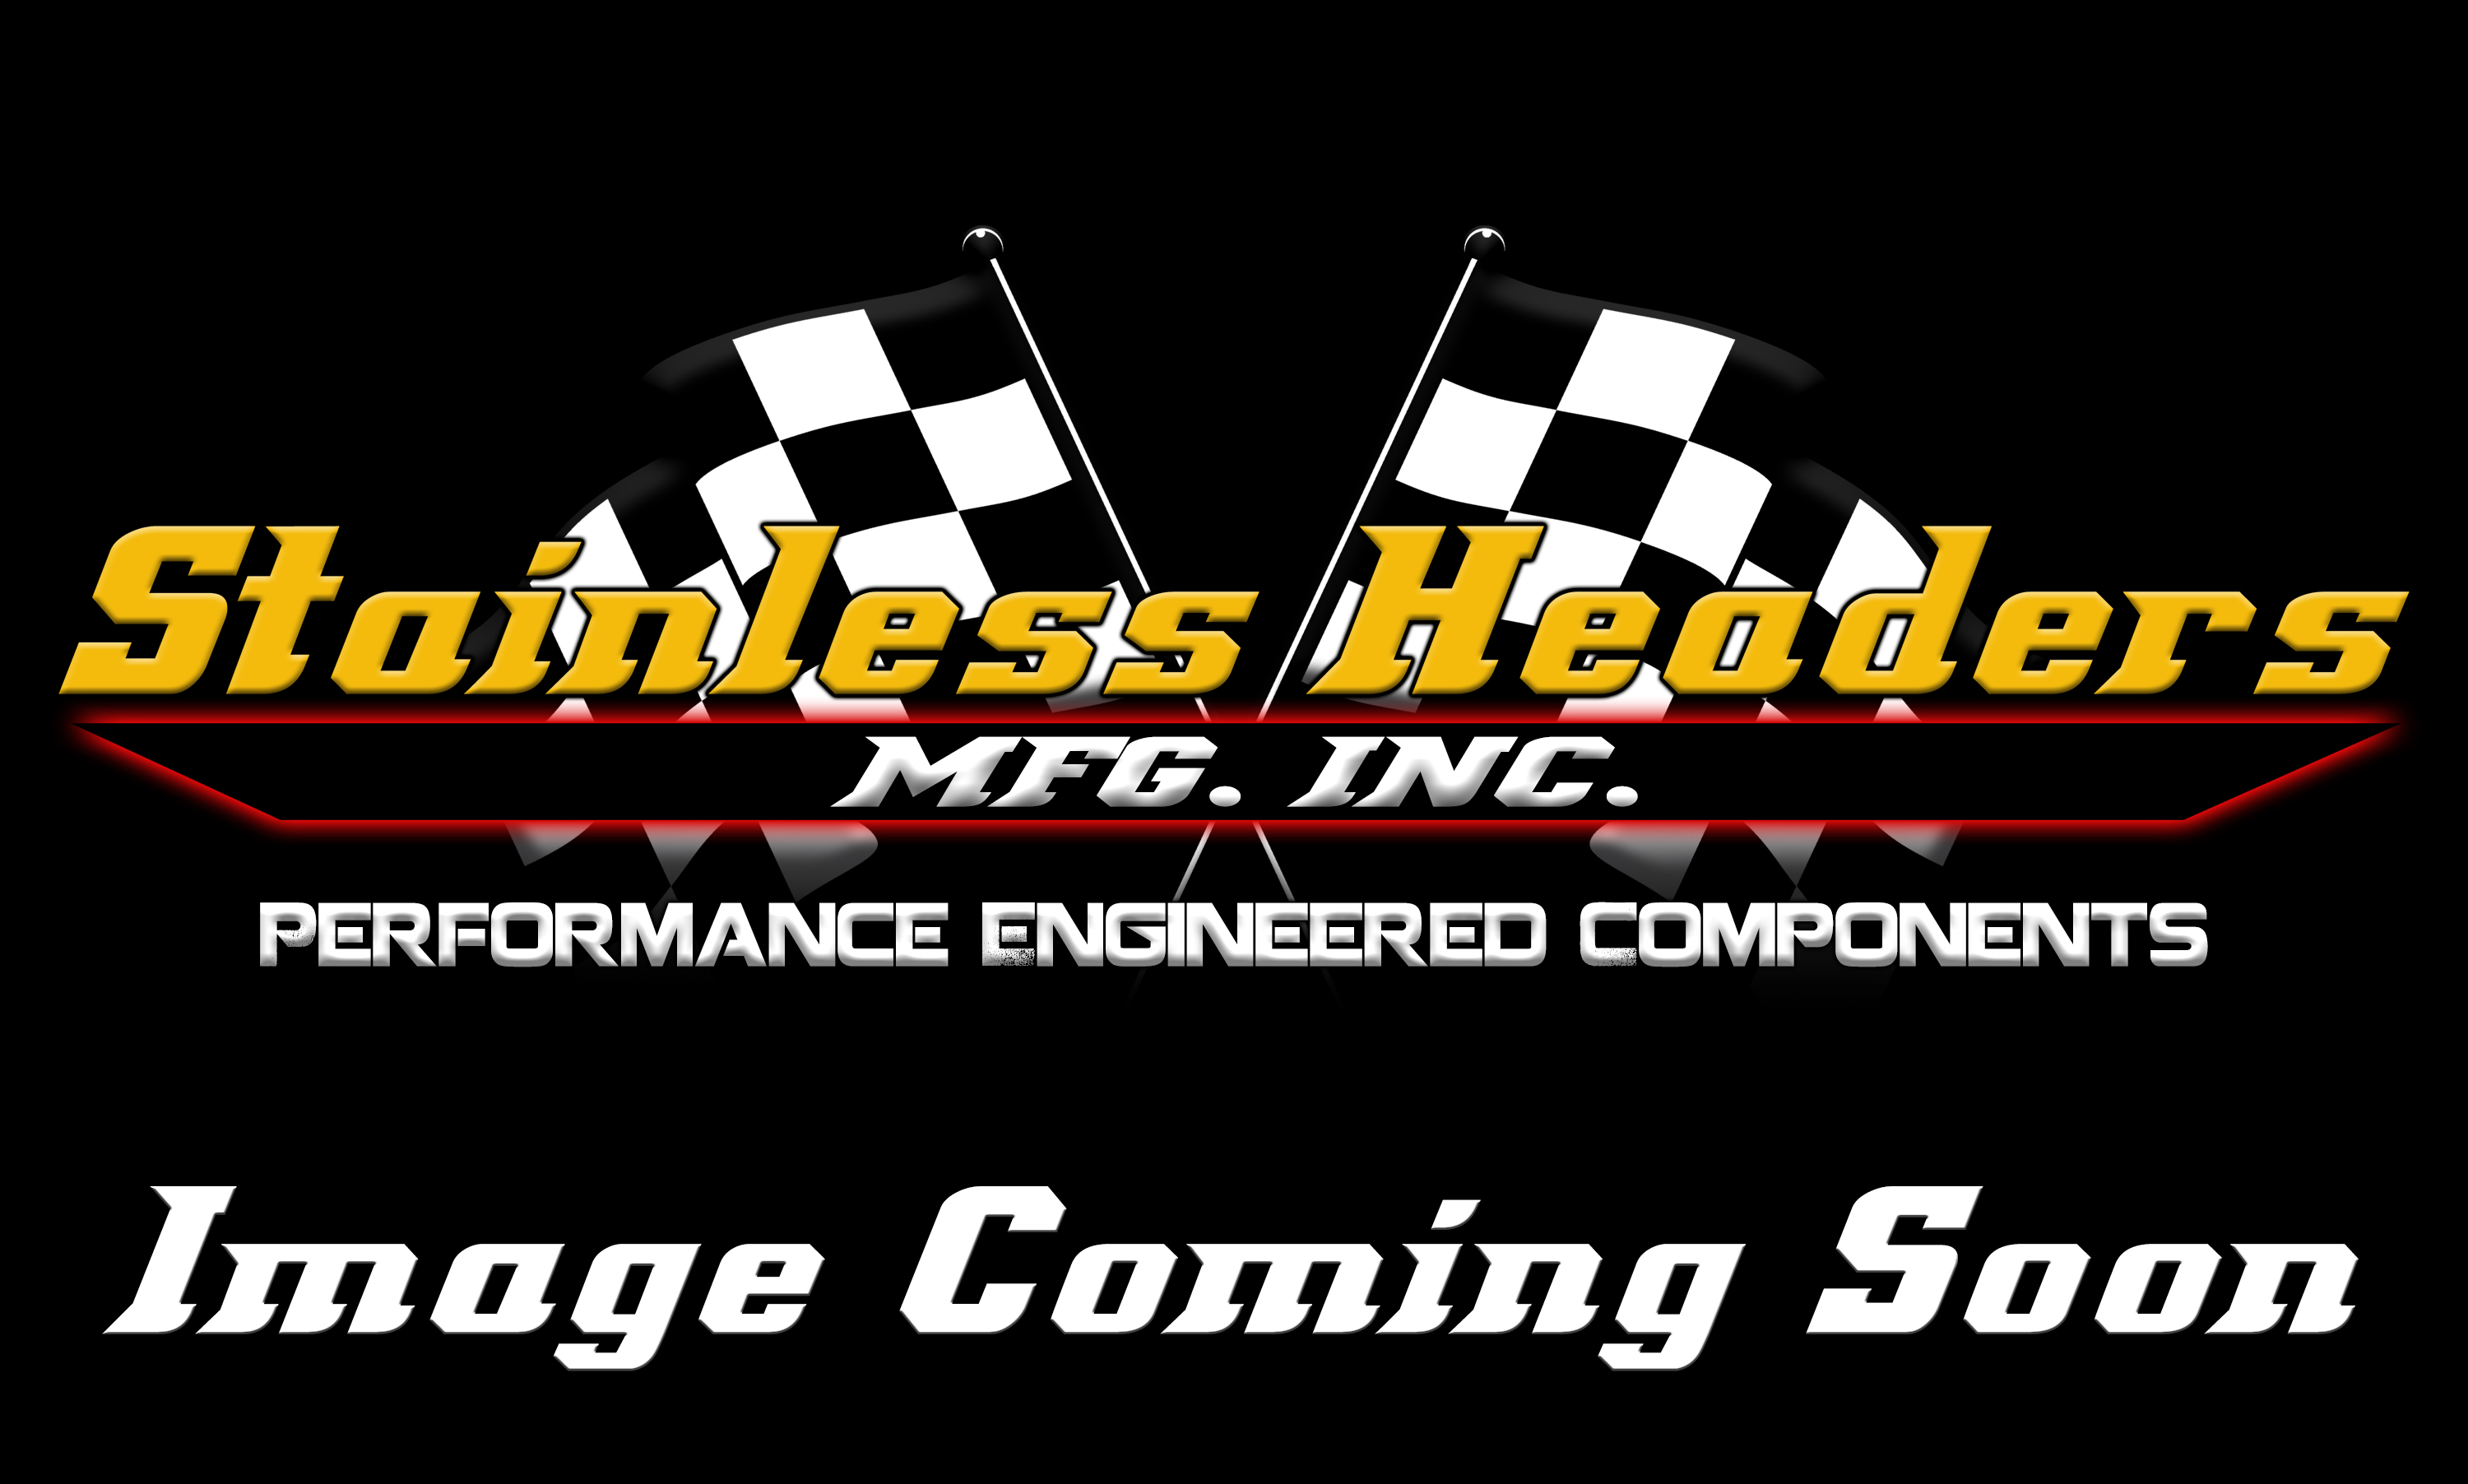 CompTurbo Technologies - CTR4201H-7675 Oil-Less 3.0 Turbocharger (1200 HP)